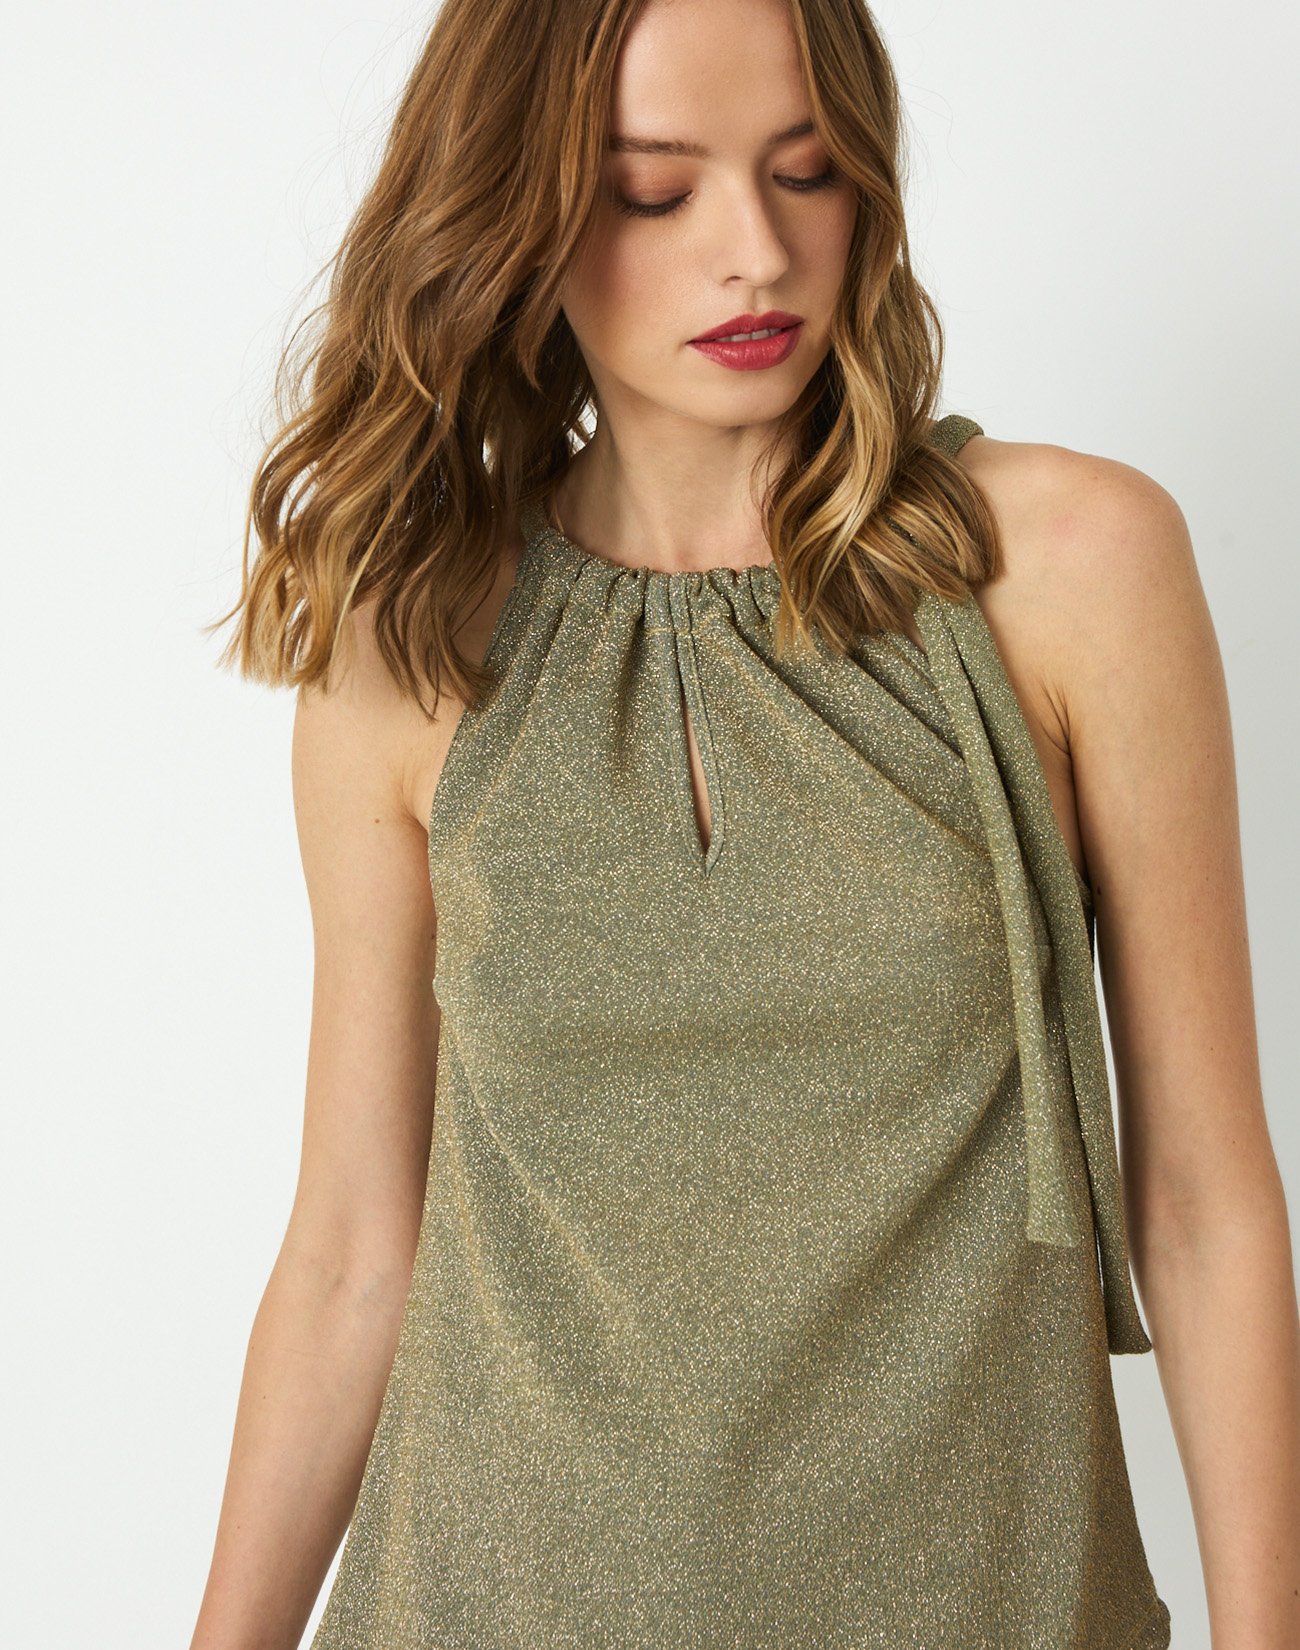 Top with metallic thread